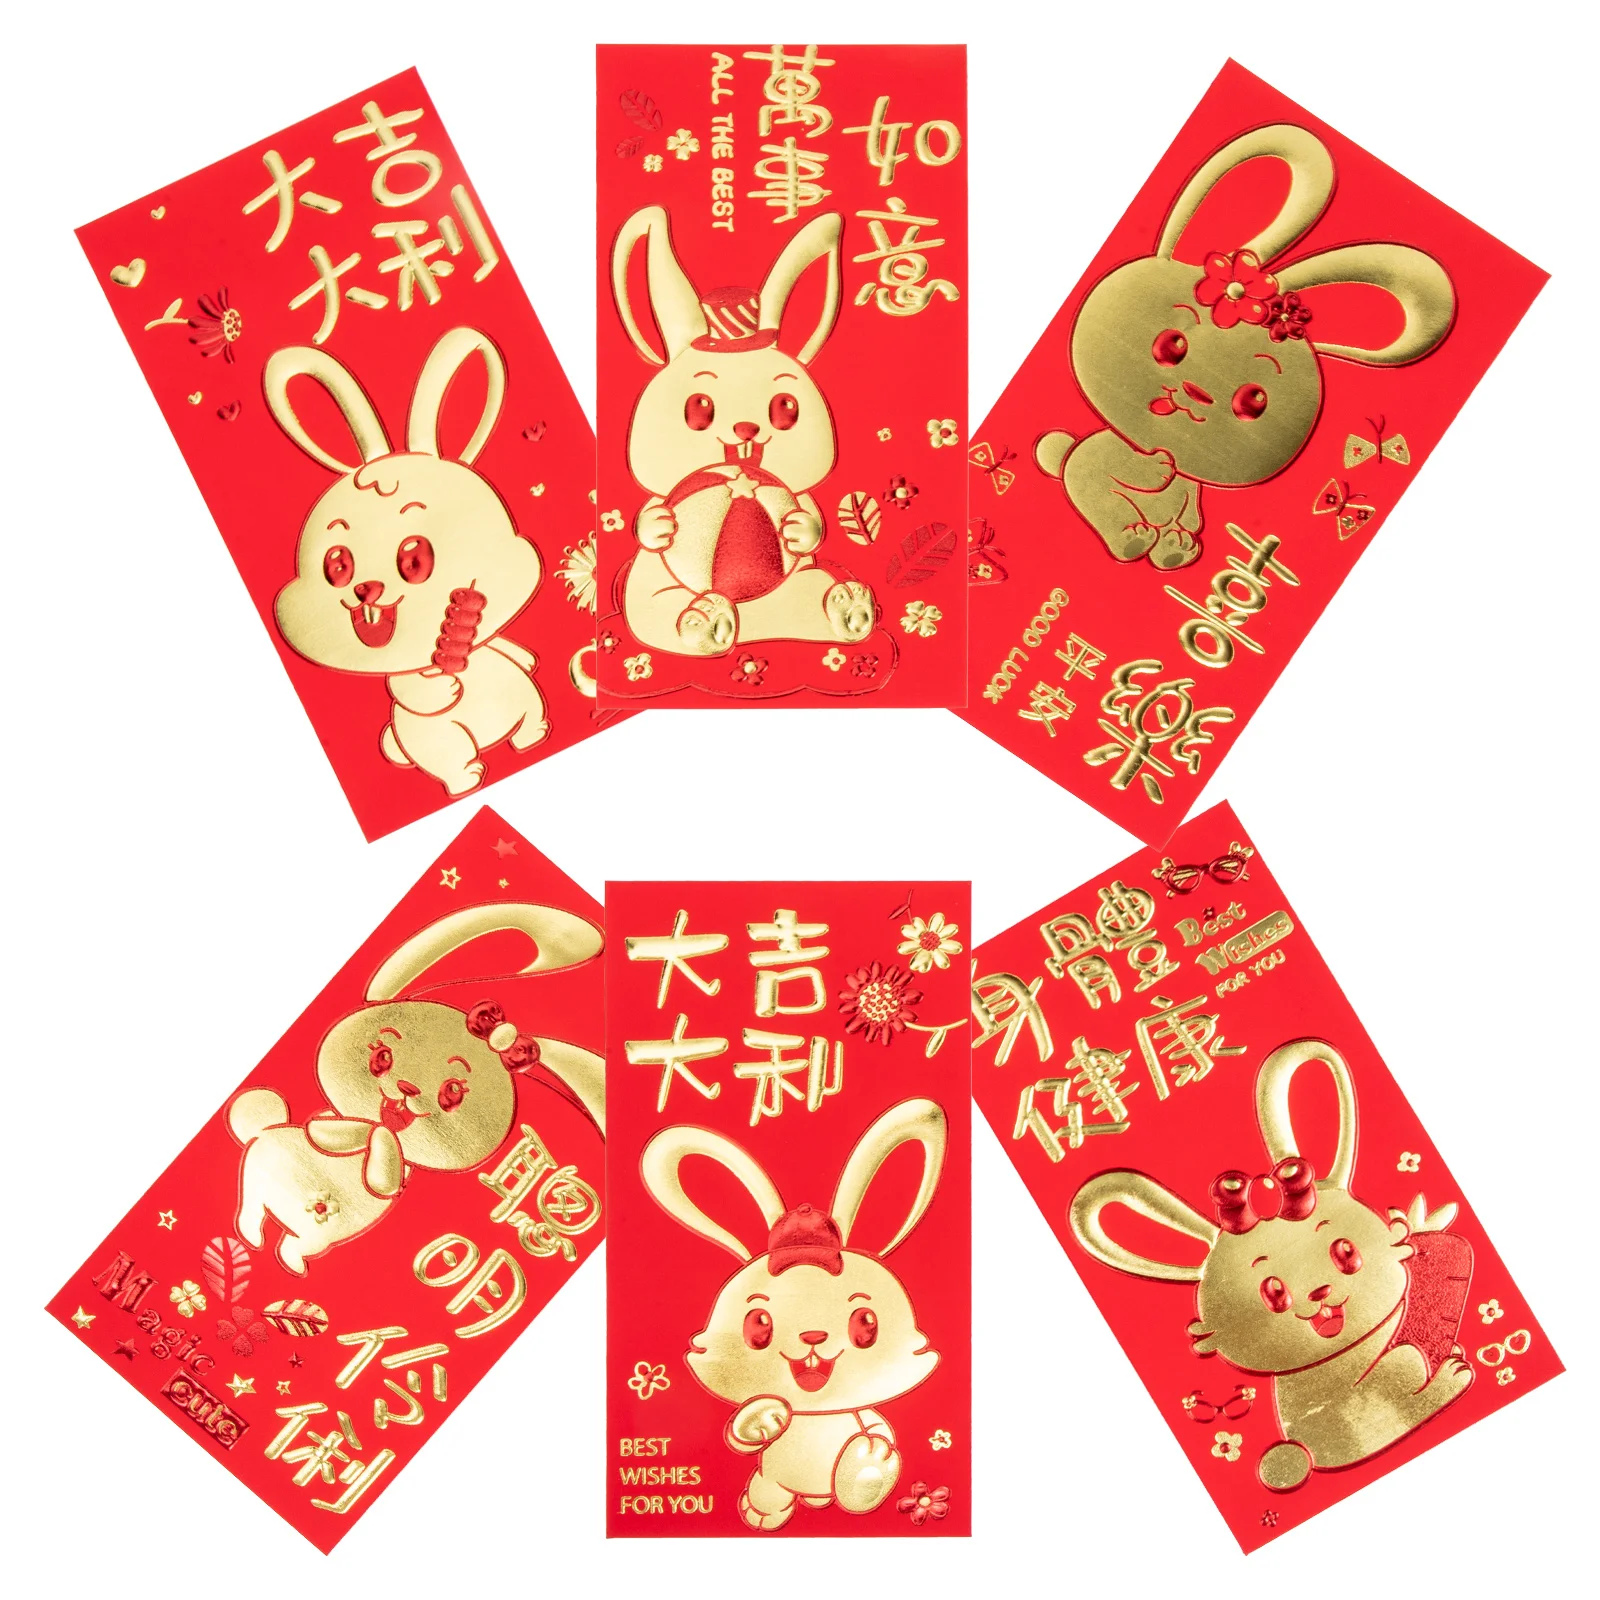 

30pcs 2023 Rabbit New Year Cartoon Red Envelope Red Envelopes with 6 Patterns Spring Festival Cartoon Red Packets Money Bags